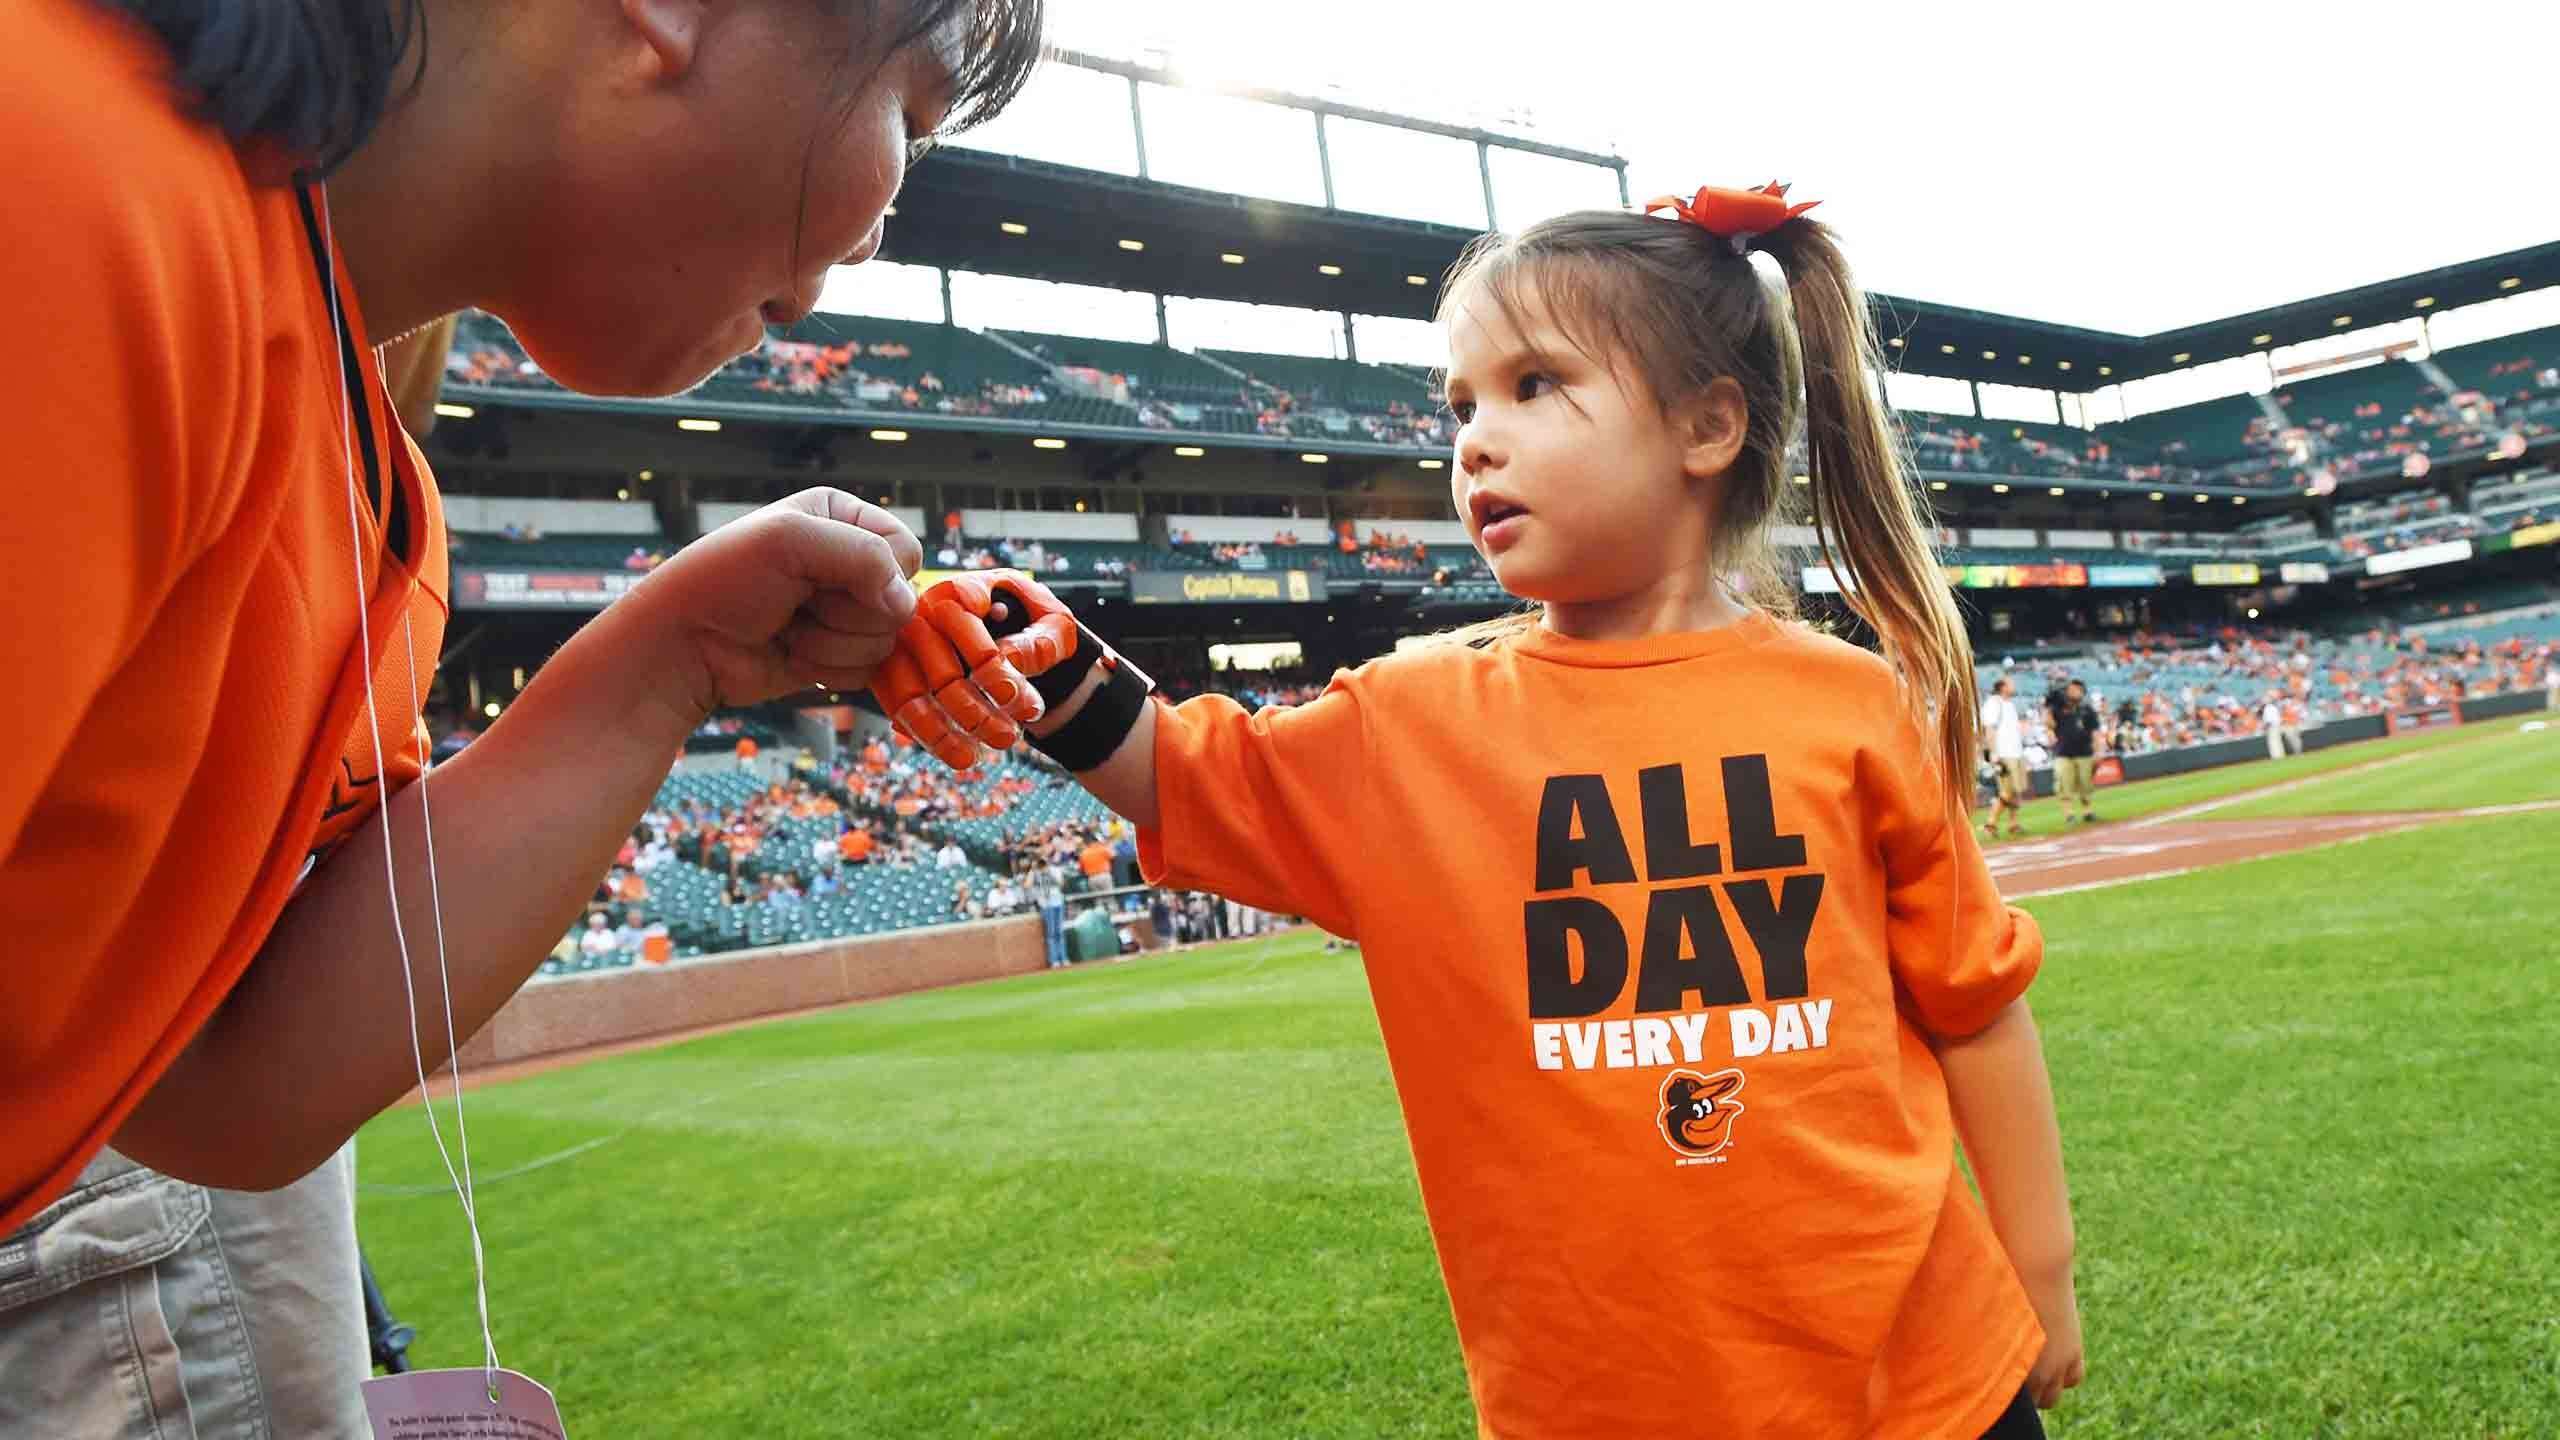 image for This 7-Year-Old Girl Is Pitching at the World Series With a 3D Printed Hand